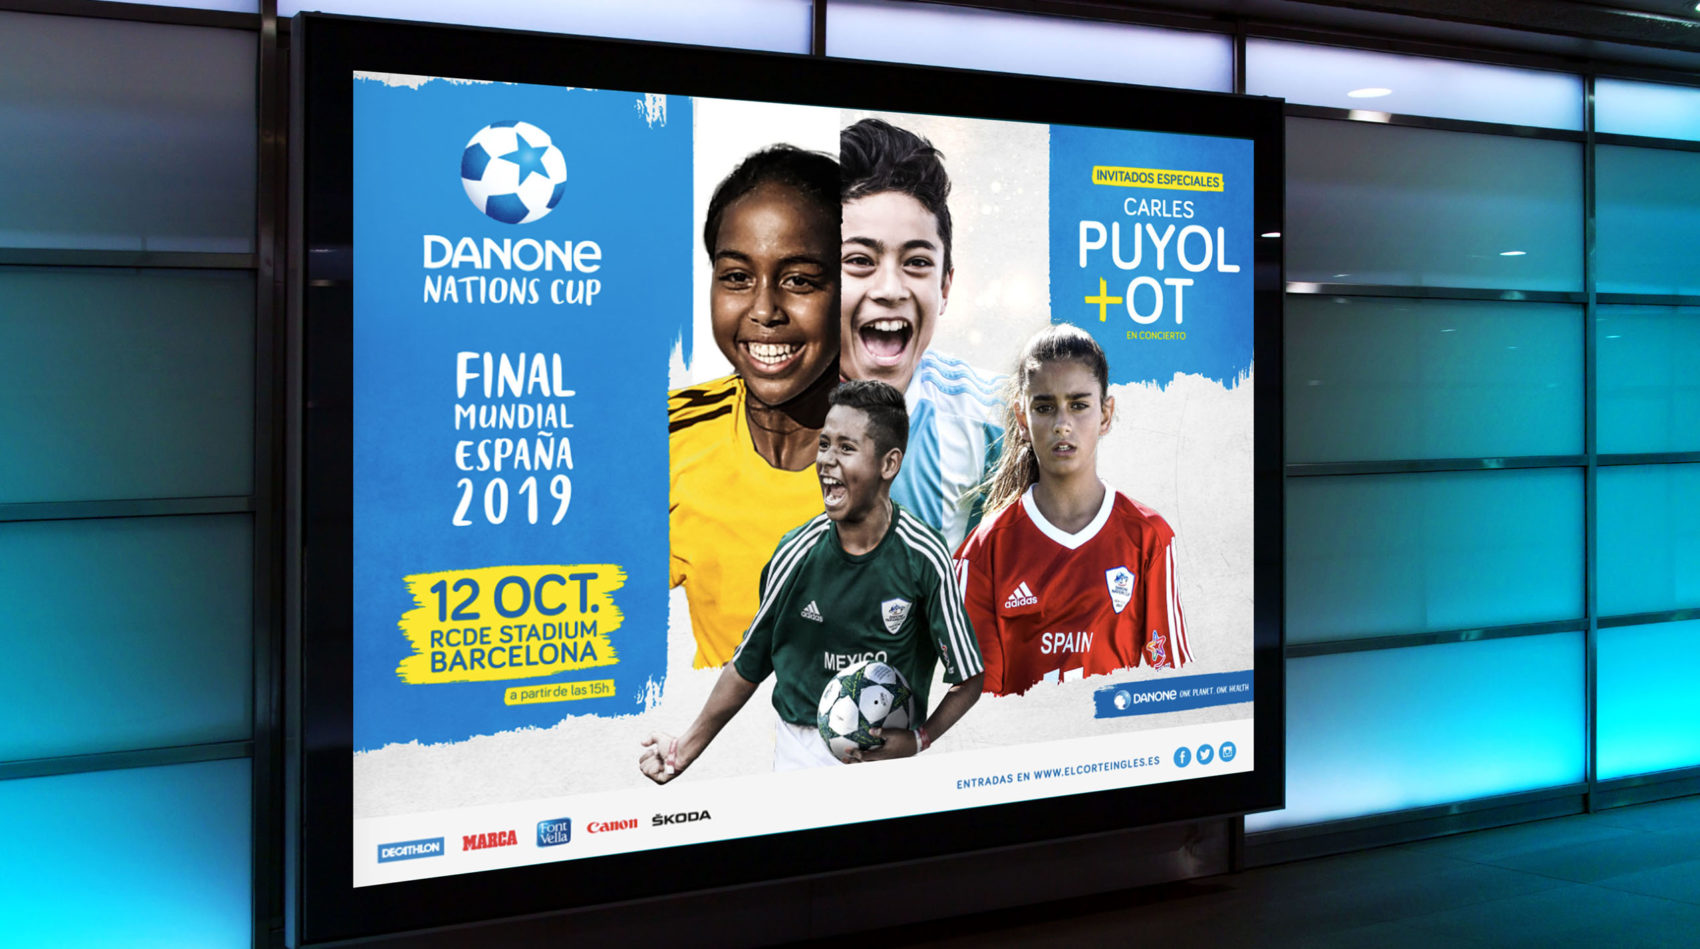 Projet_project_Danone_Nations_Cup_edition_2019_campagne_campaign_communication_globale_global_affichage_advertising_print_social_media_change_the_game